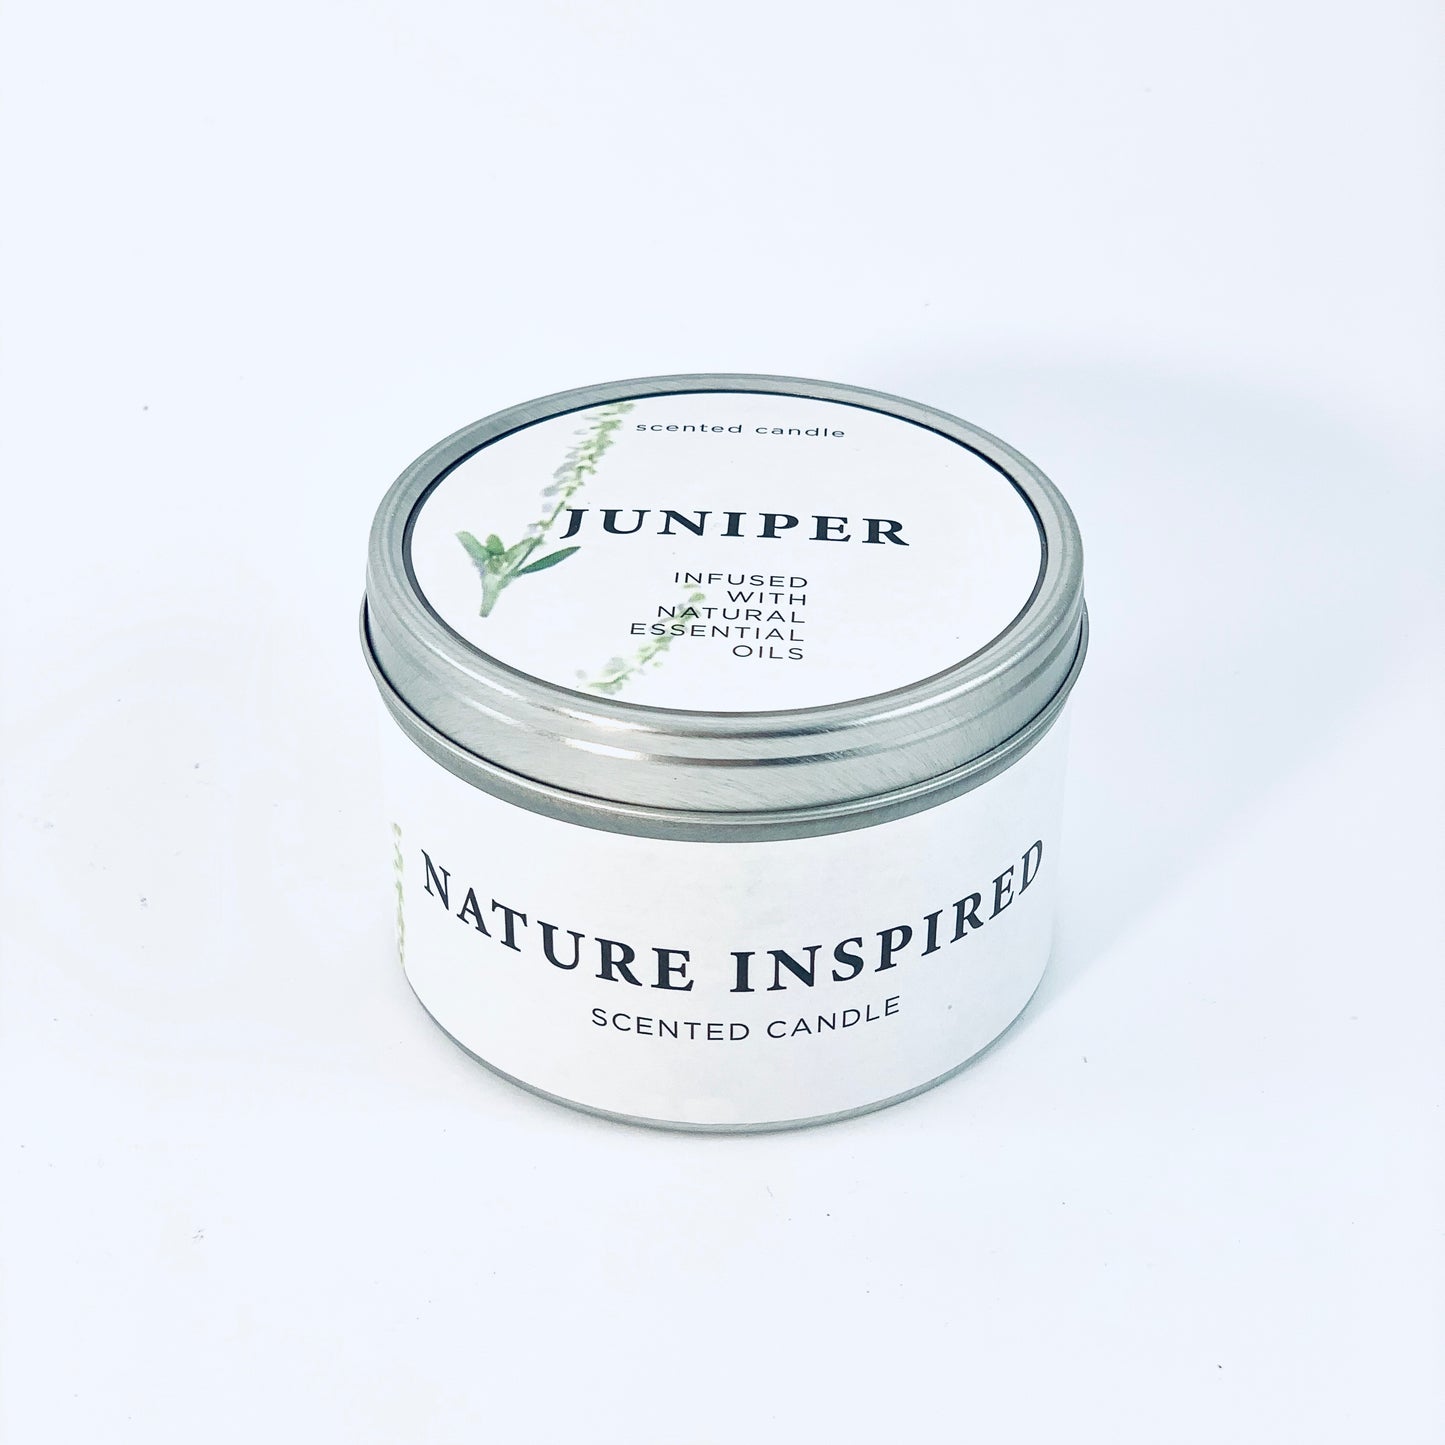 Natural soy wax candle in a metal container with juniper scent